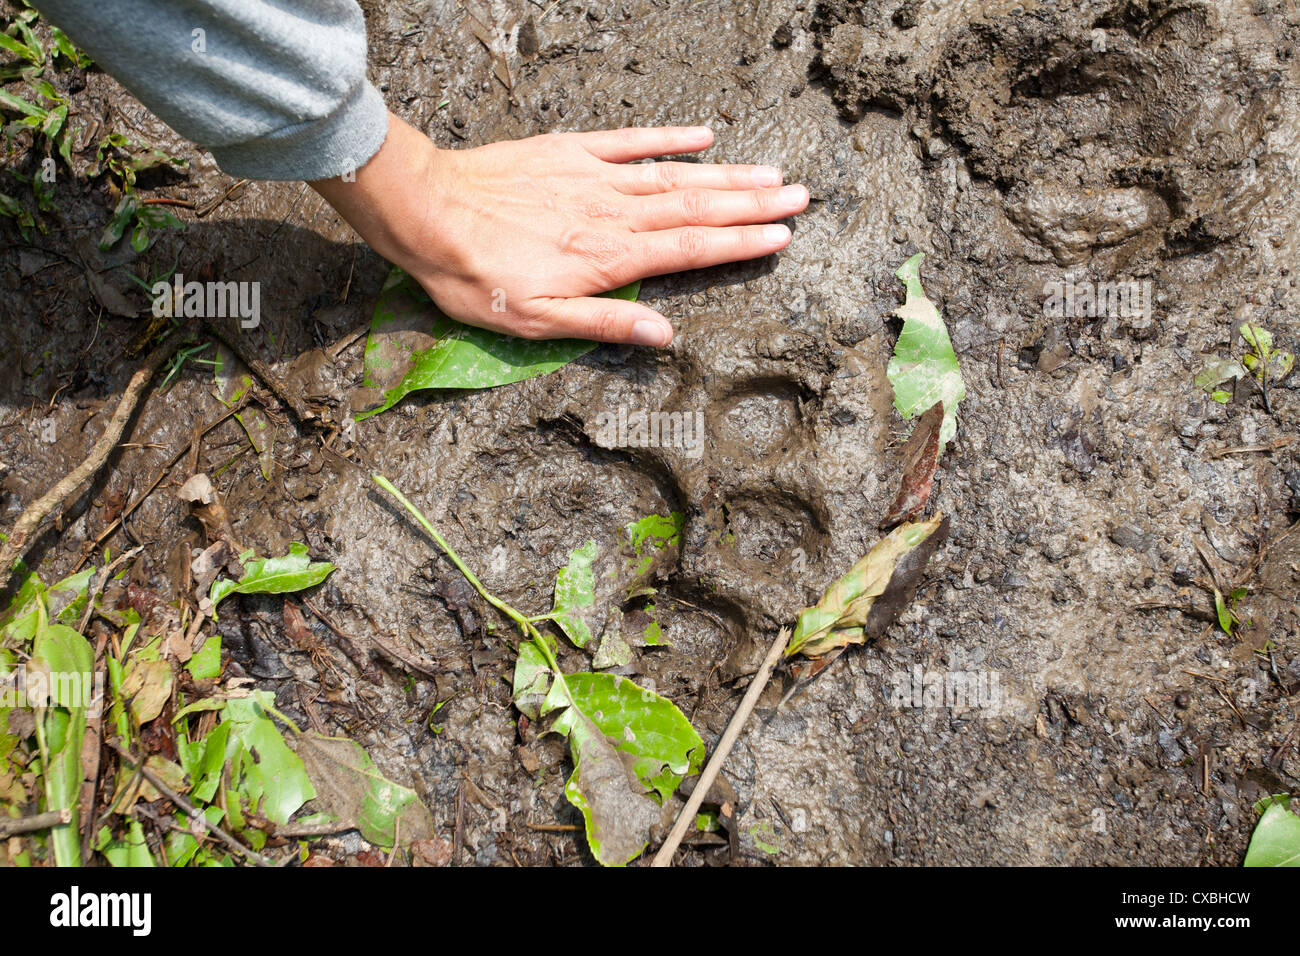 Woman's hand next to fresh tiger tracks in Chitwan National Park, Nepal Stock Photo